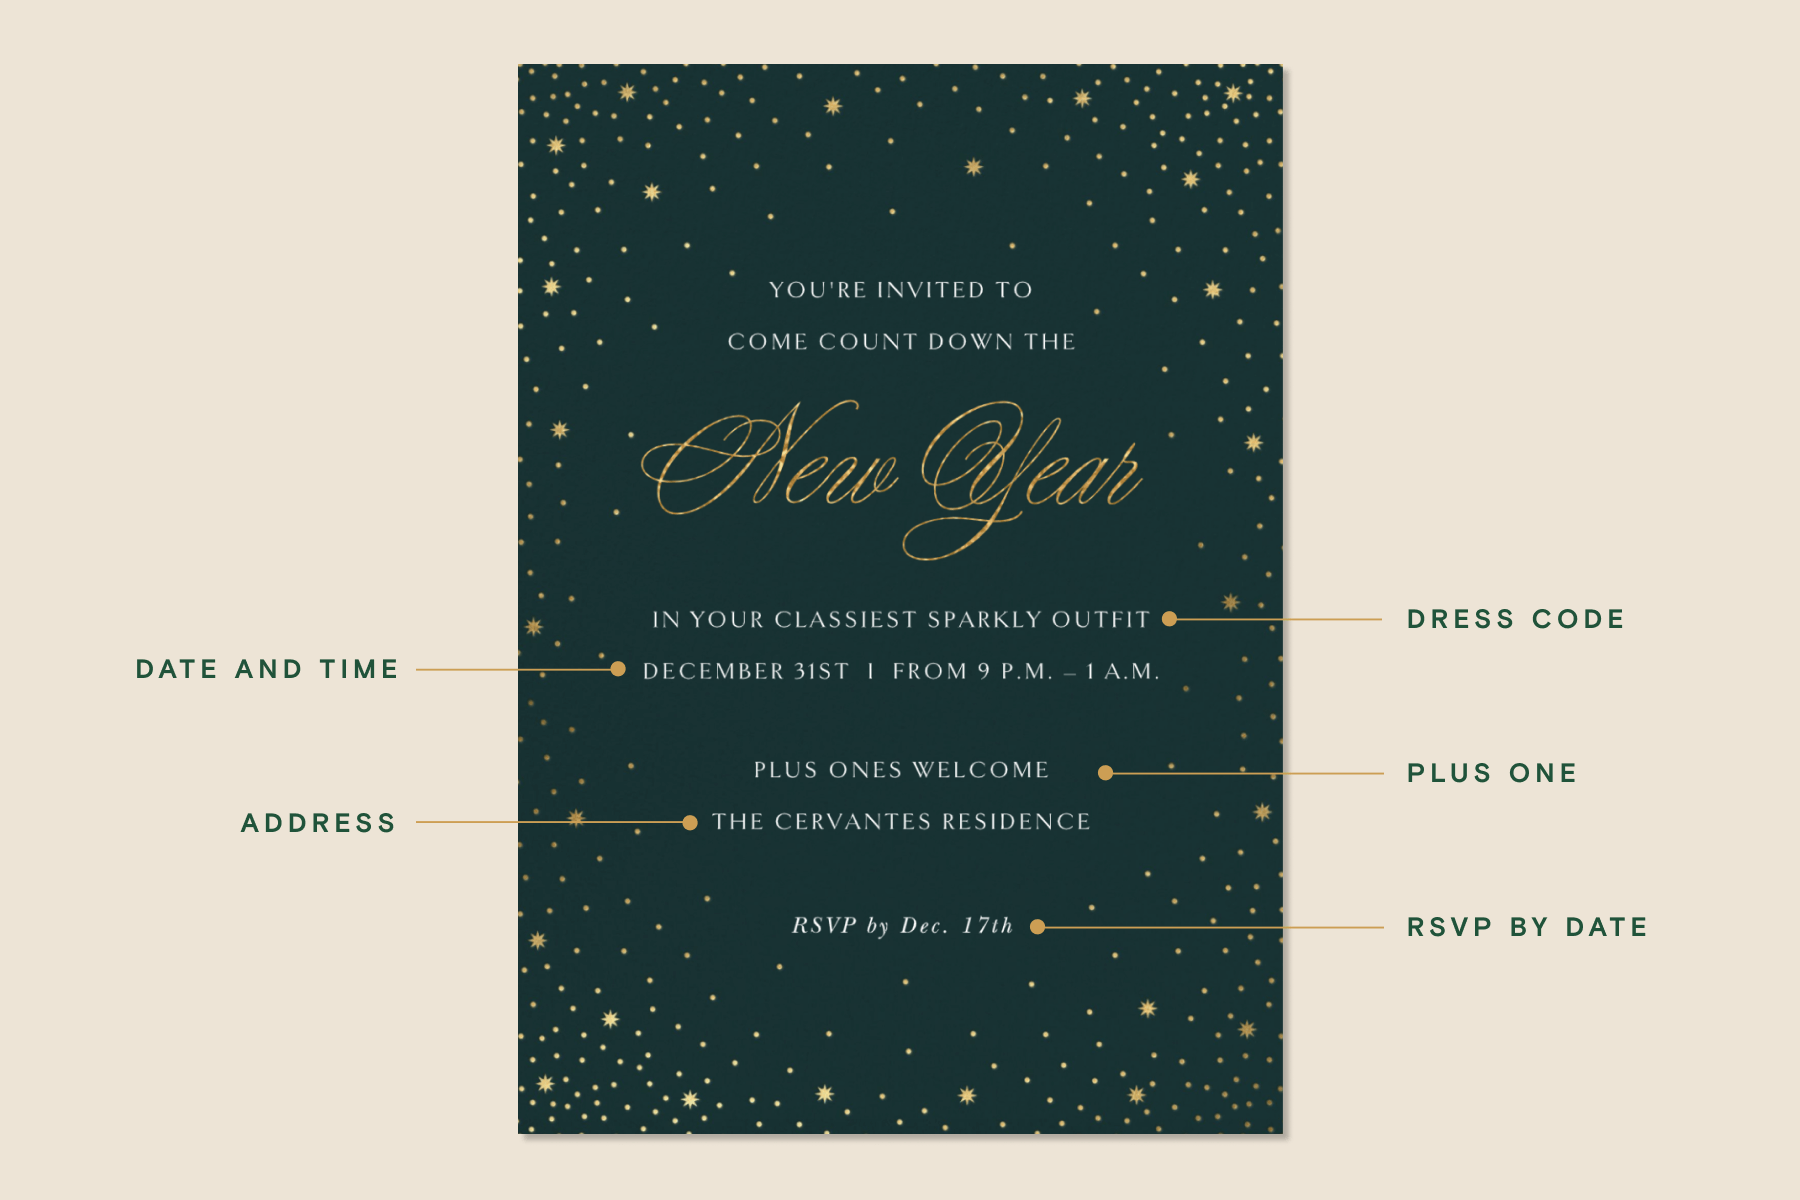 A forest green invitation with gold dots and stars and bullets pointing to elements of the invitation.